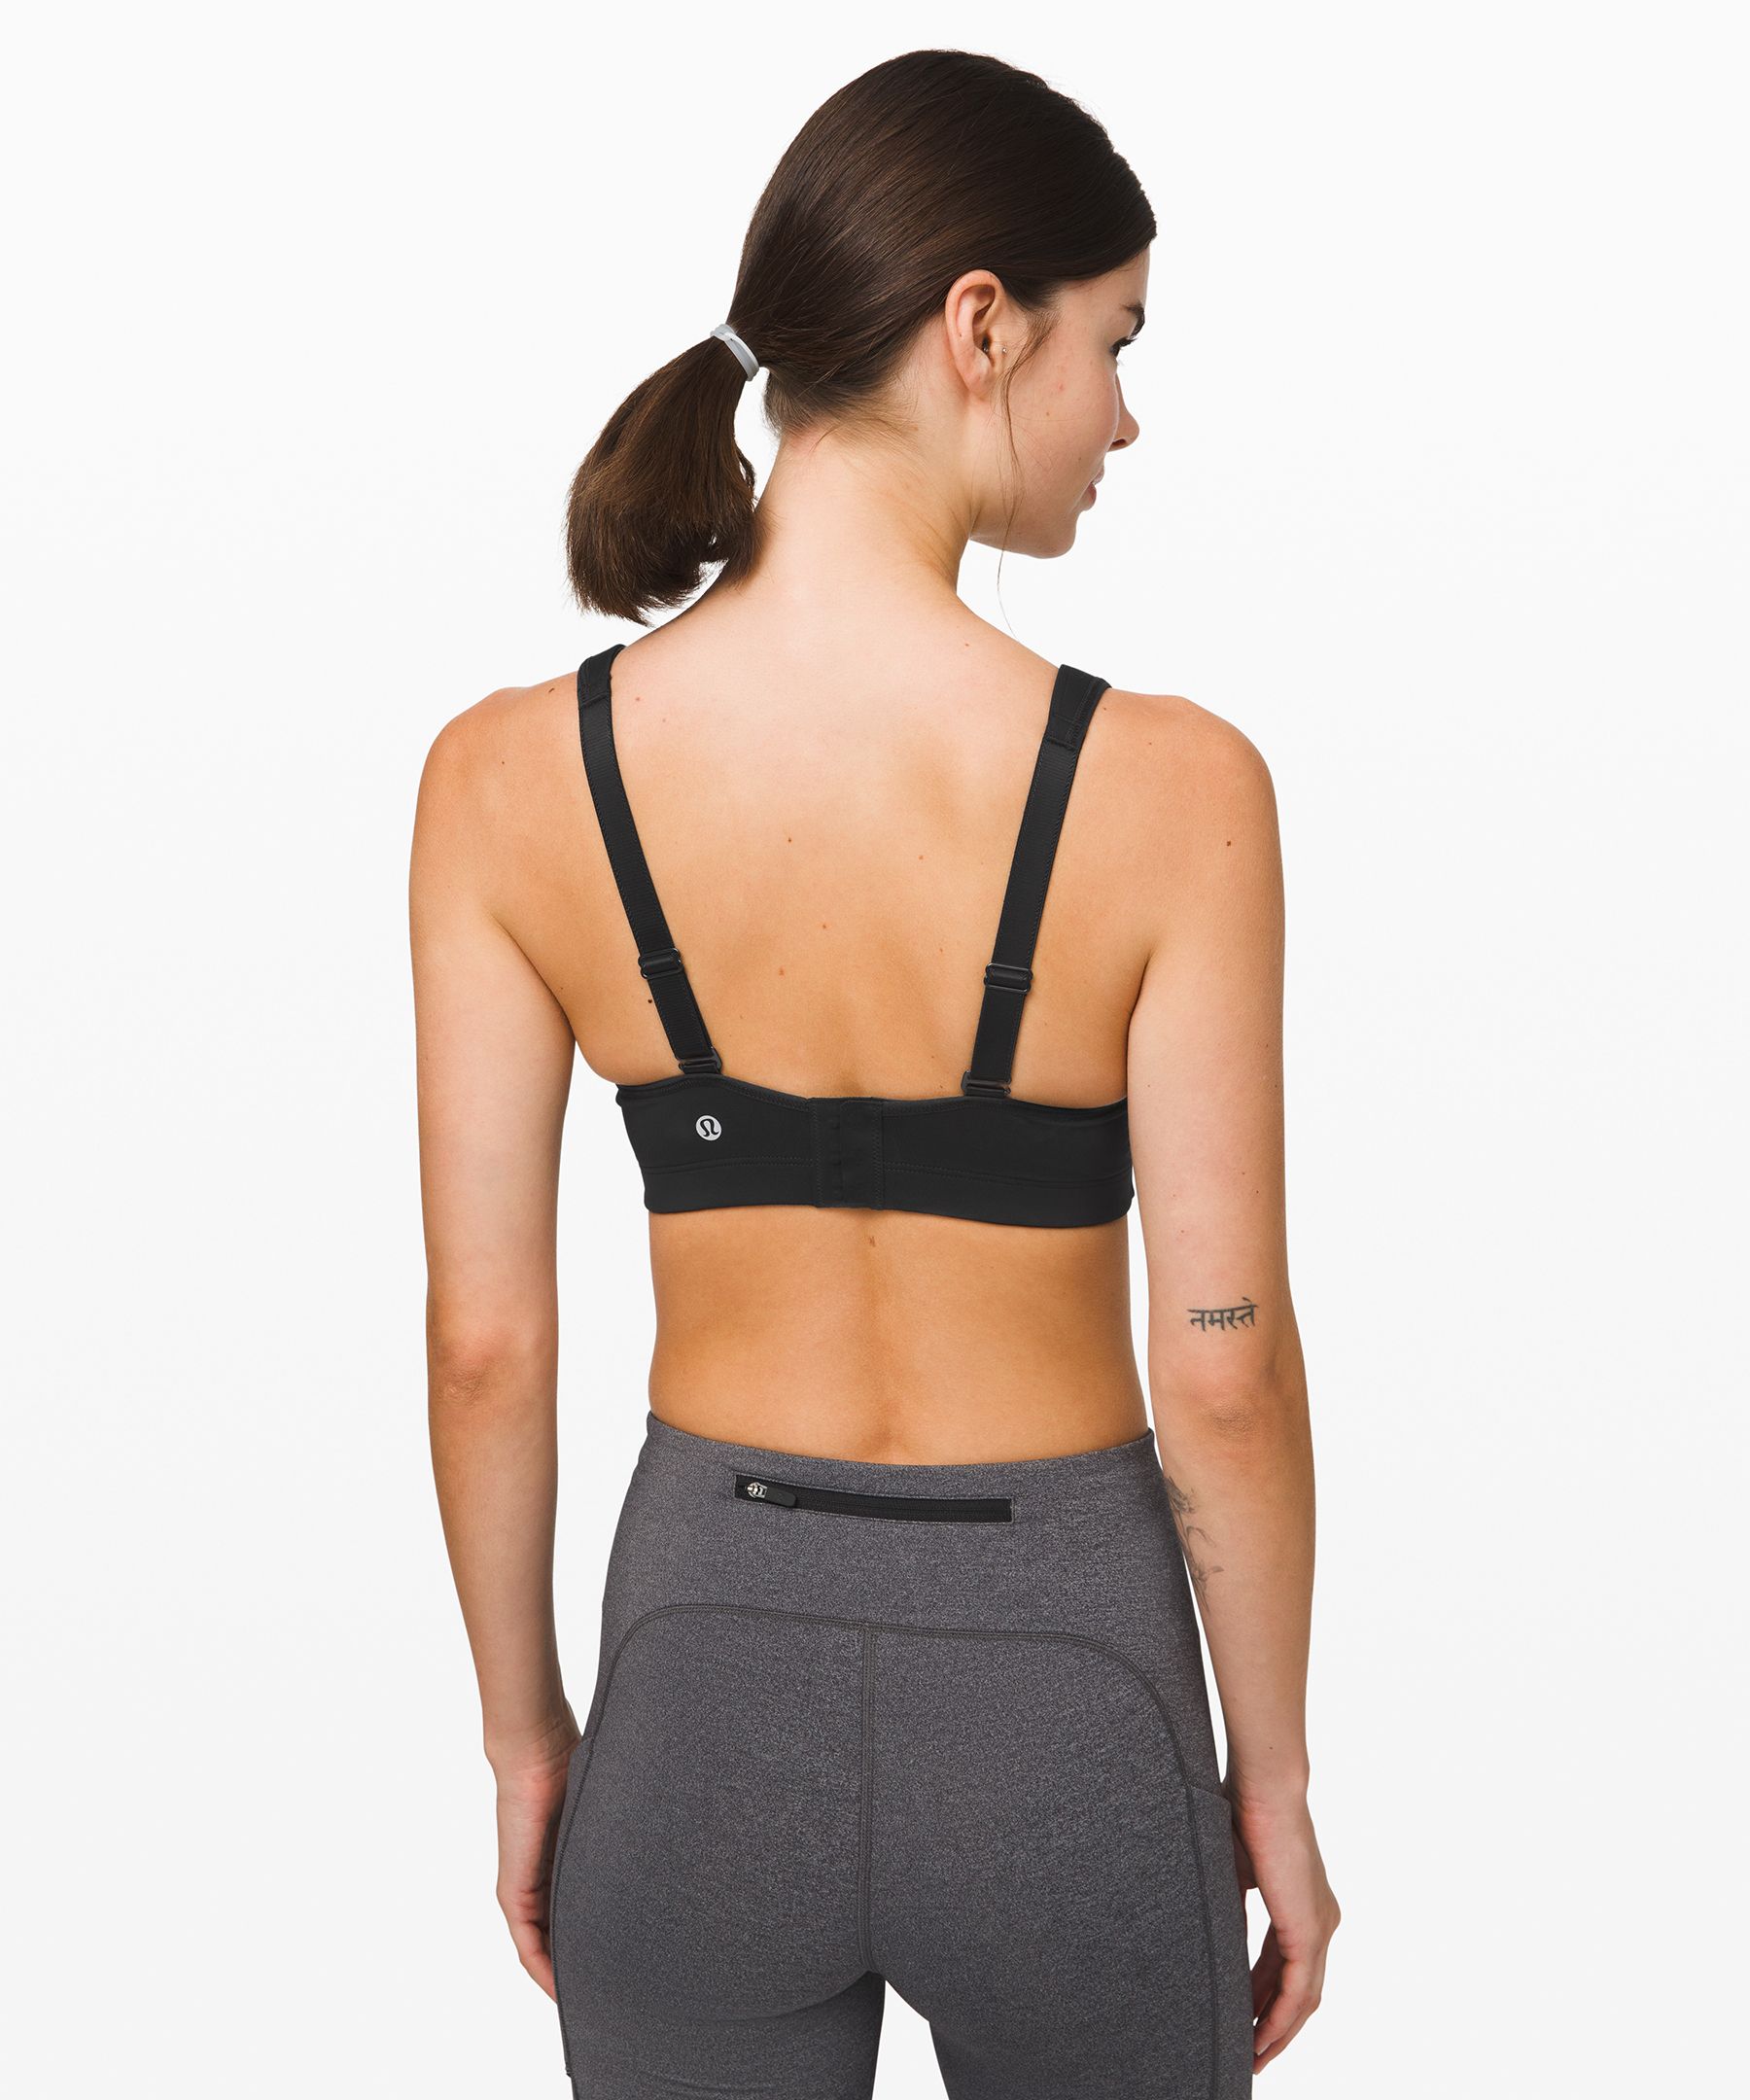 lululemon - Looking for a bra with ultimate support? Look no further–meet  the Ta Ta Tamer. We designed this sports bra to give you the heavy duty  support, separation, and coverage that